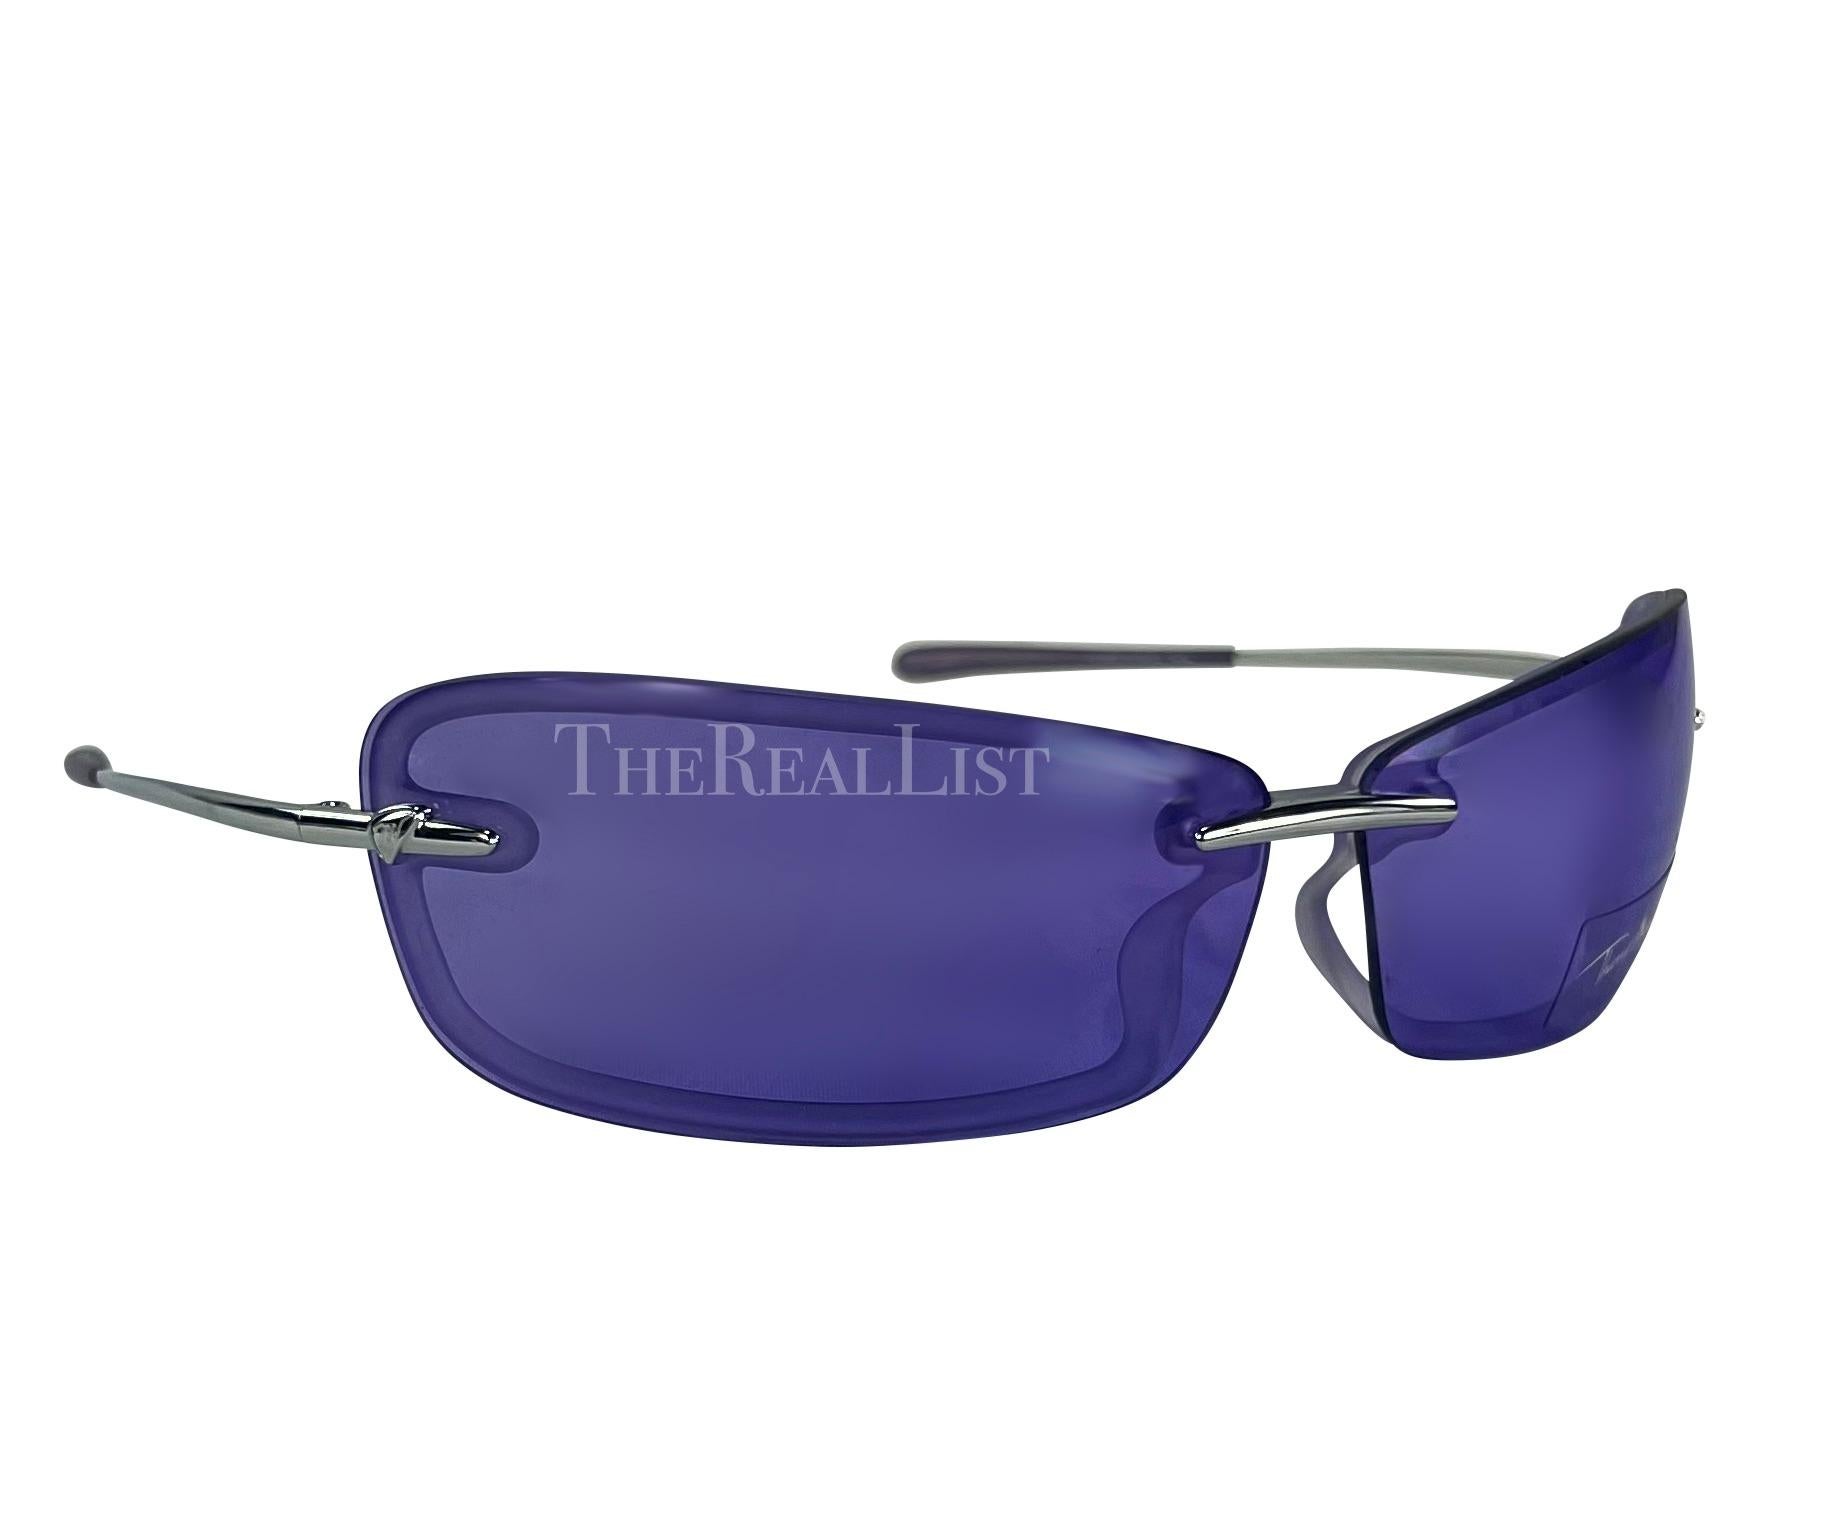 NWT Early 2000s Thierry Mugler Purple Rimless Rectangular Sunglasses For Sale 3